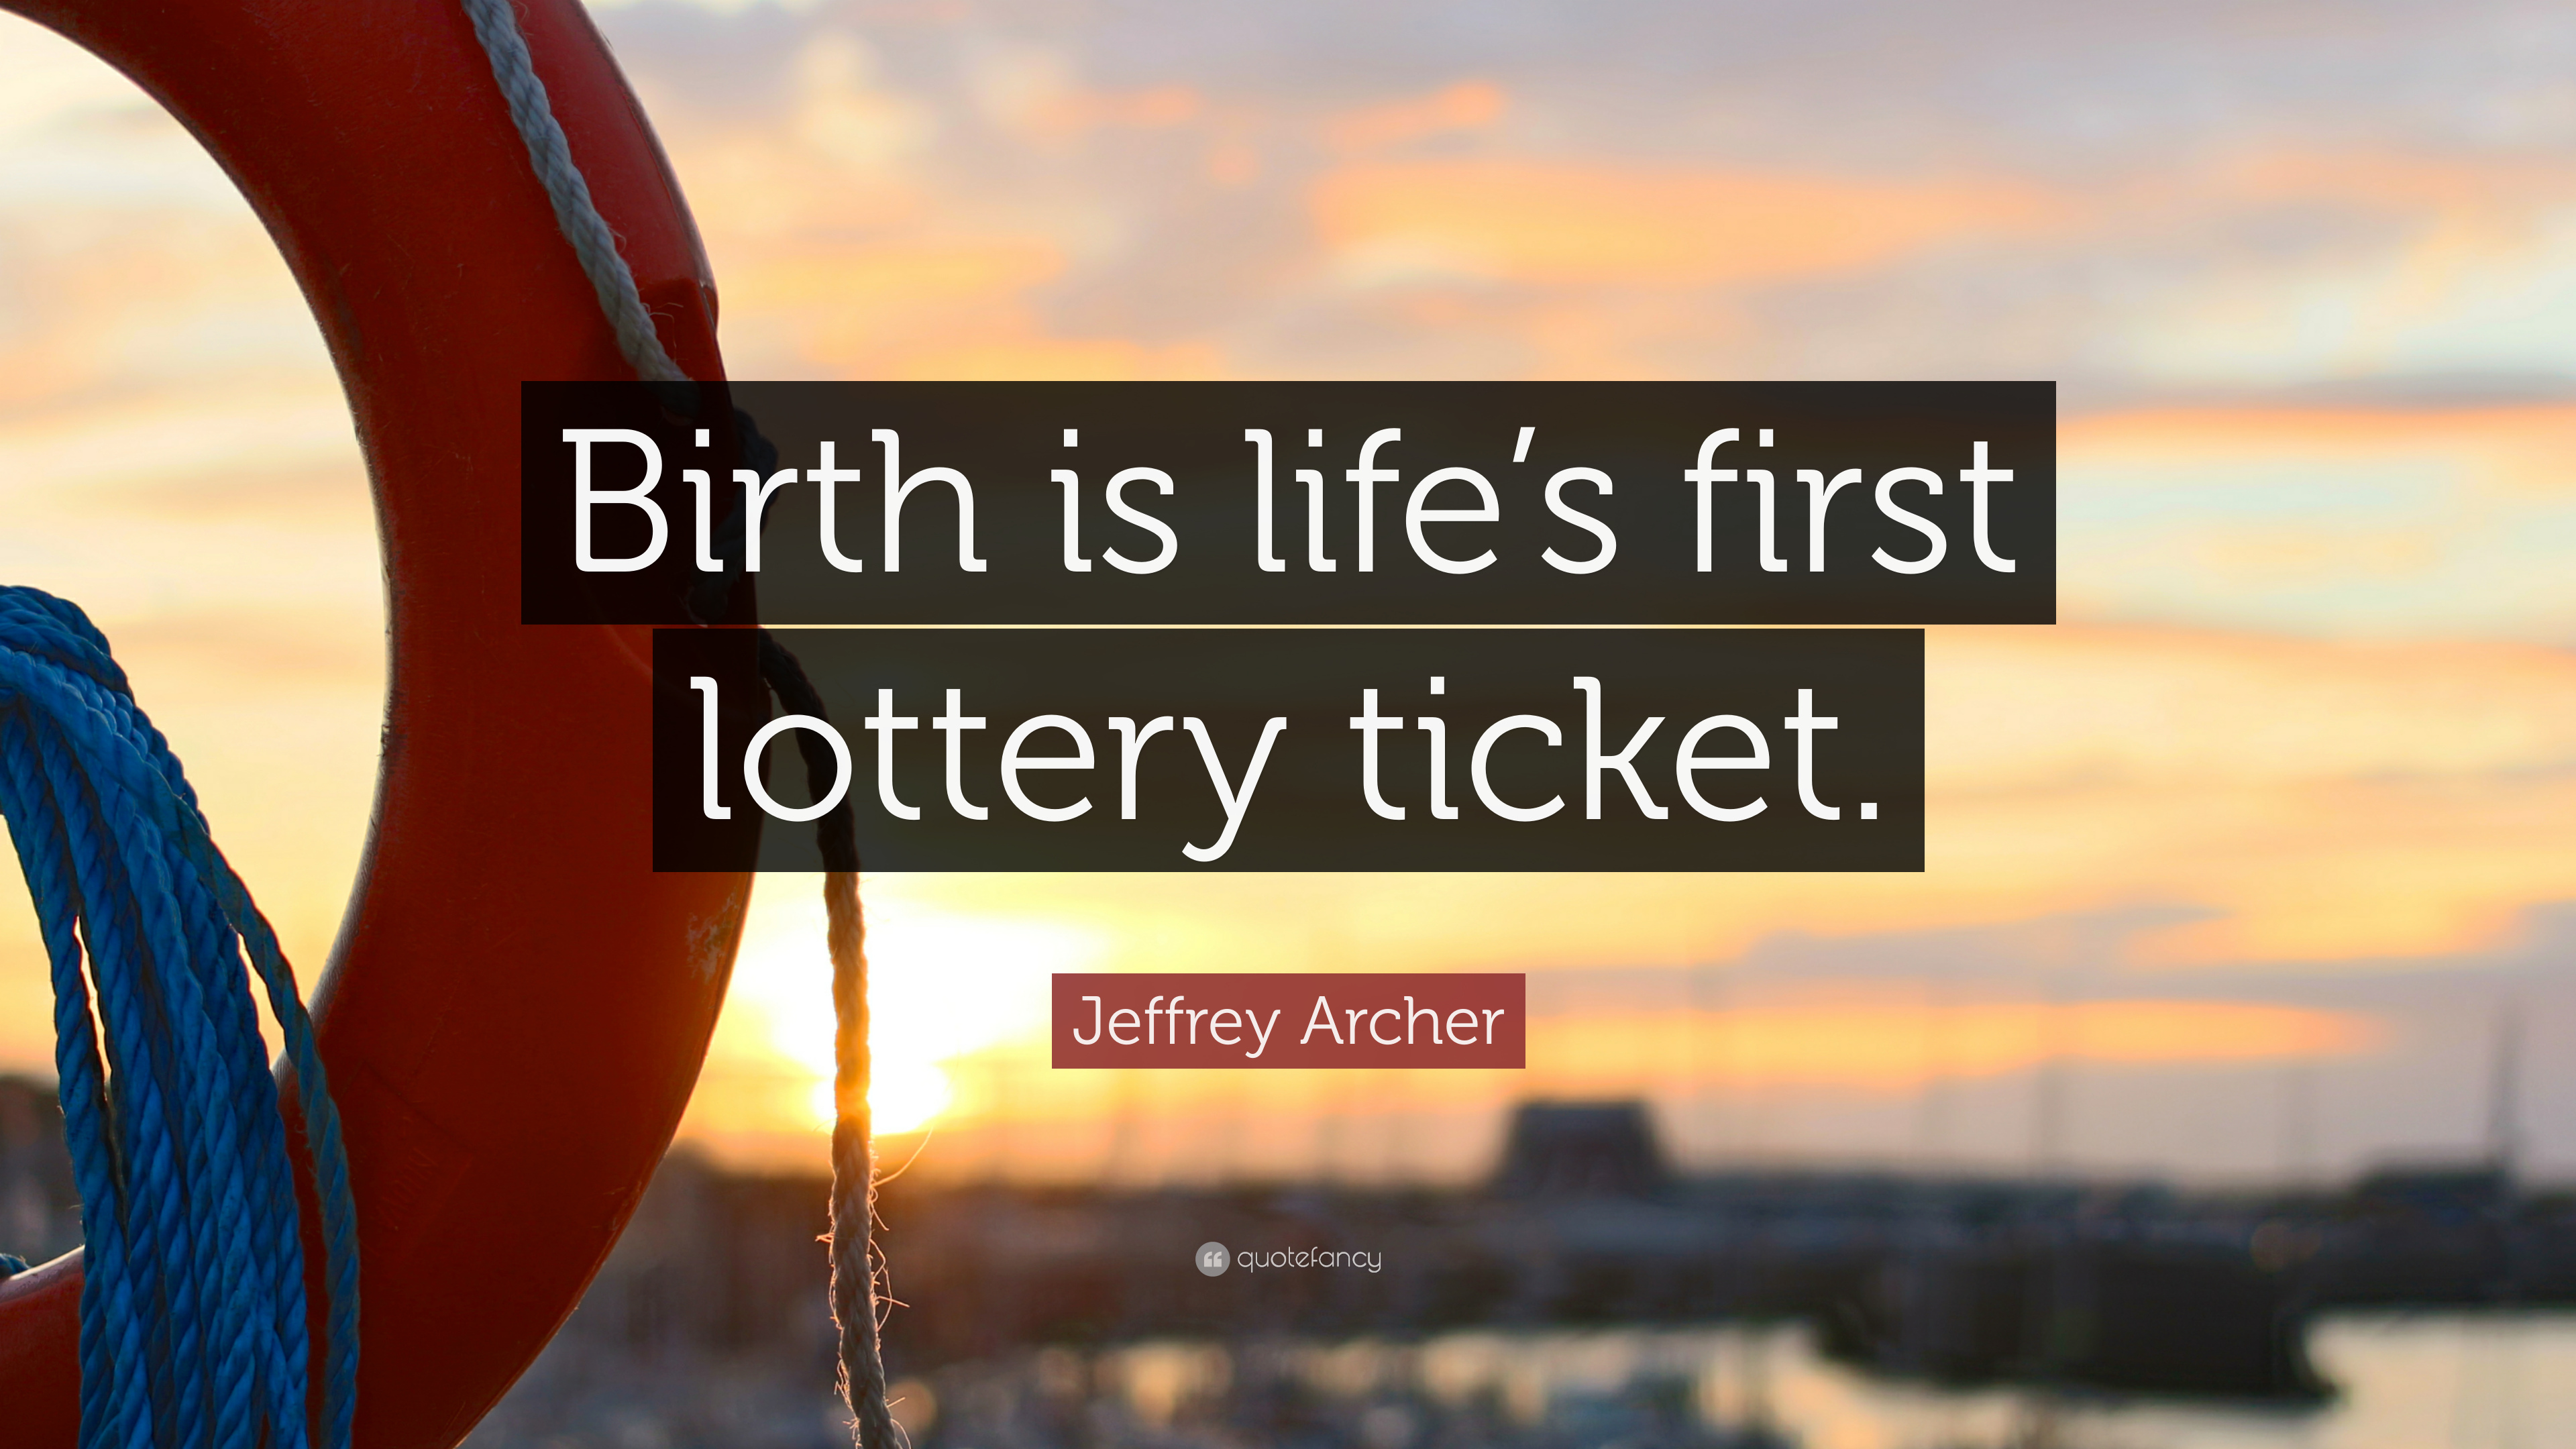 Jeffrey Archer Quote: “Birth is life's first lottery ticket